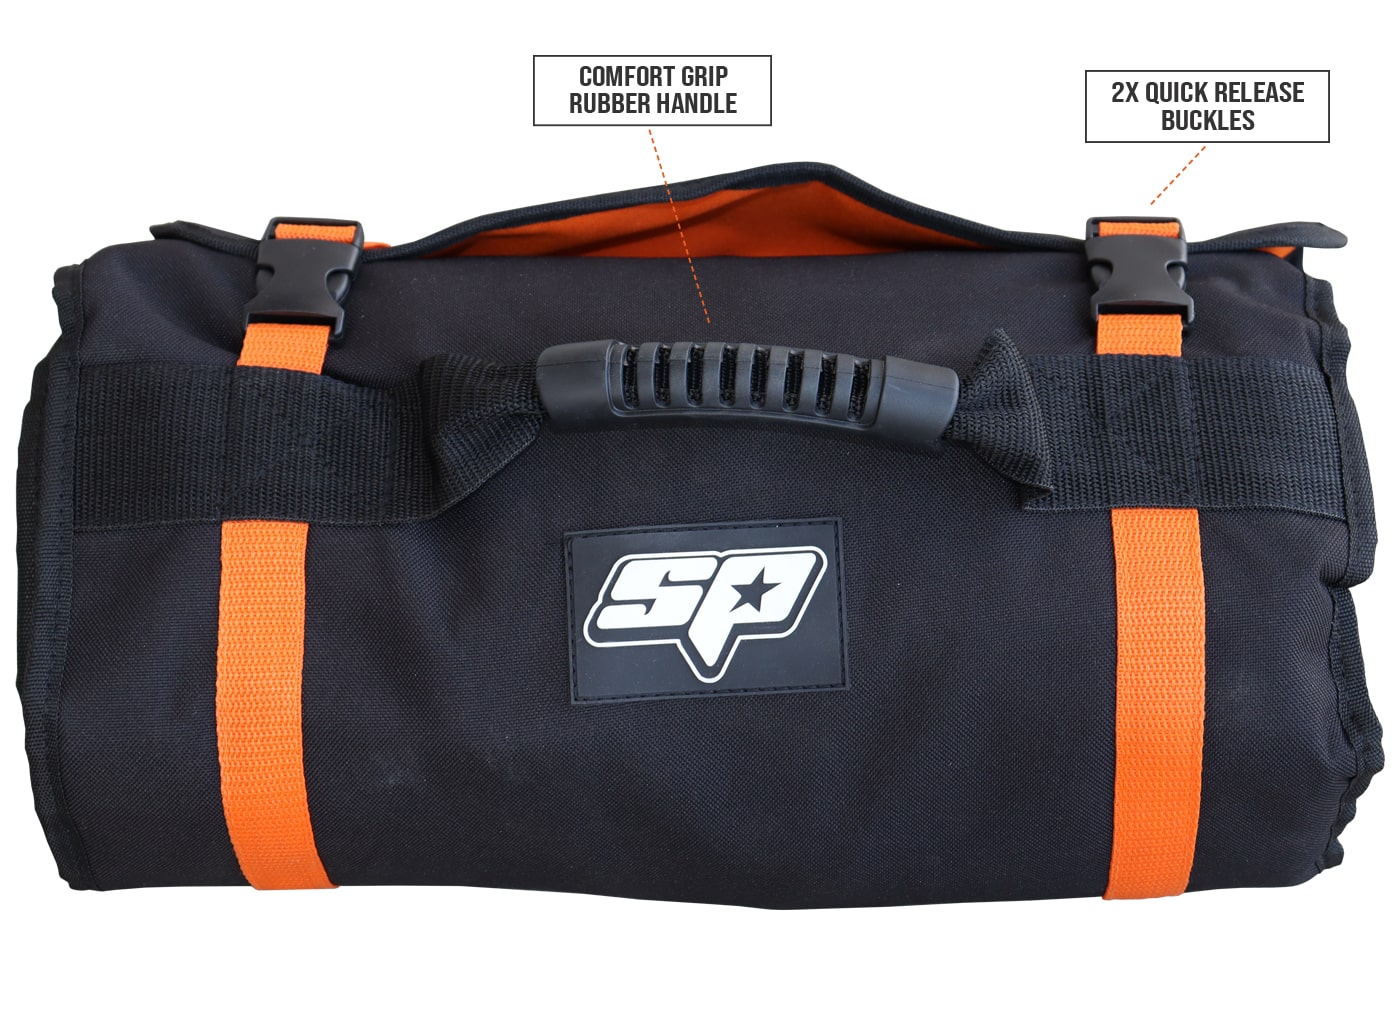 Heavy Duty Tool Roll - SP40350 by SP Tools